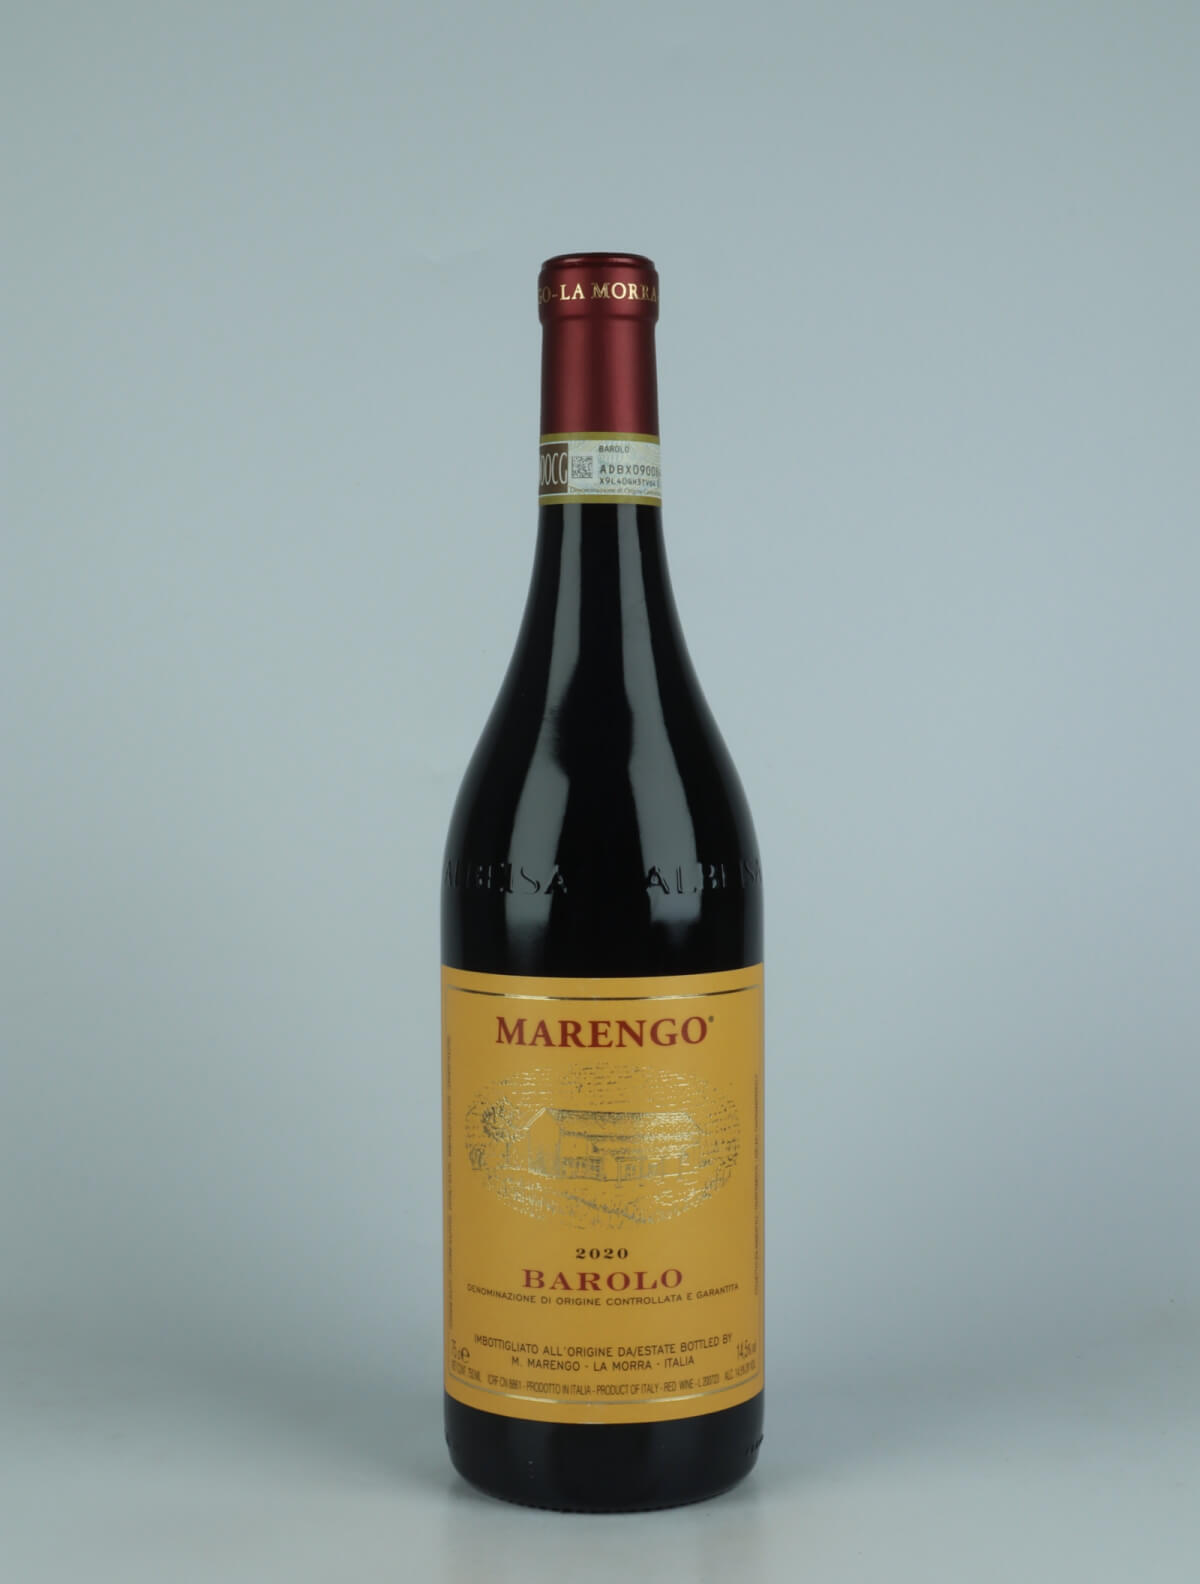 A bottle 2020 Barolo Red wine from Mario Marengo, Piedmont in Italy